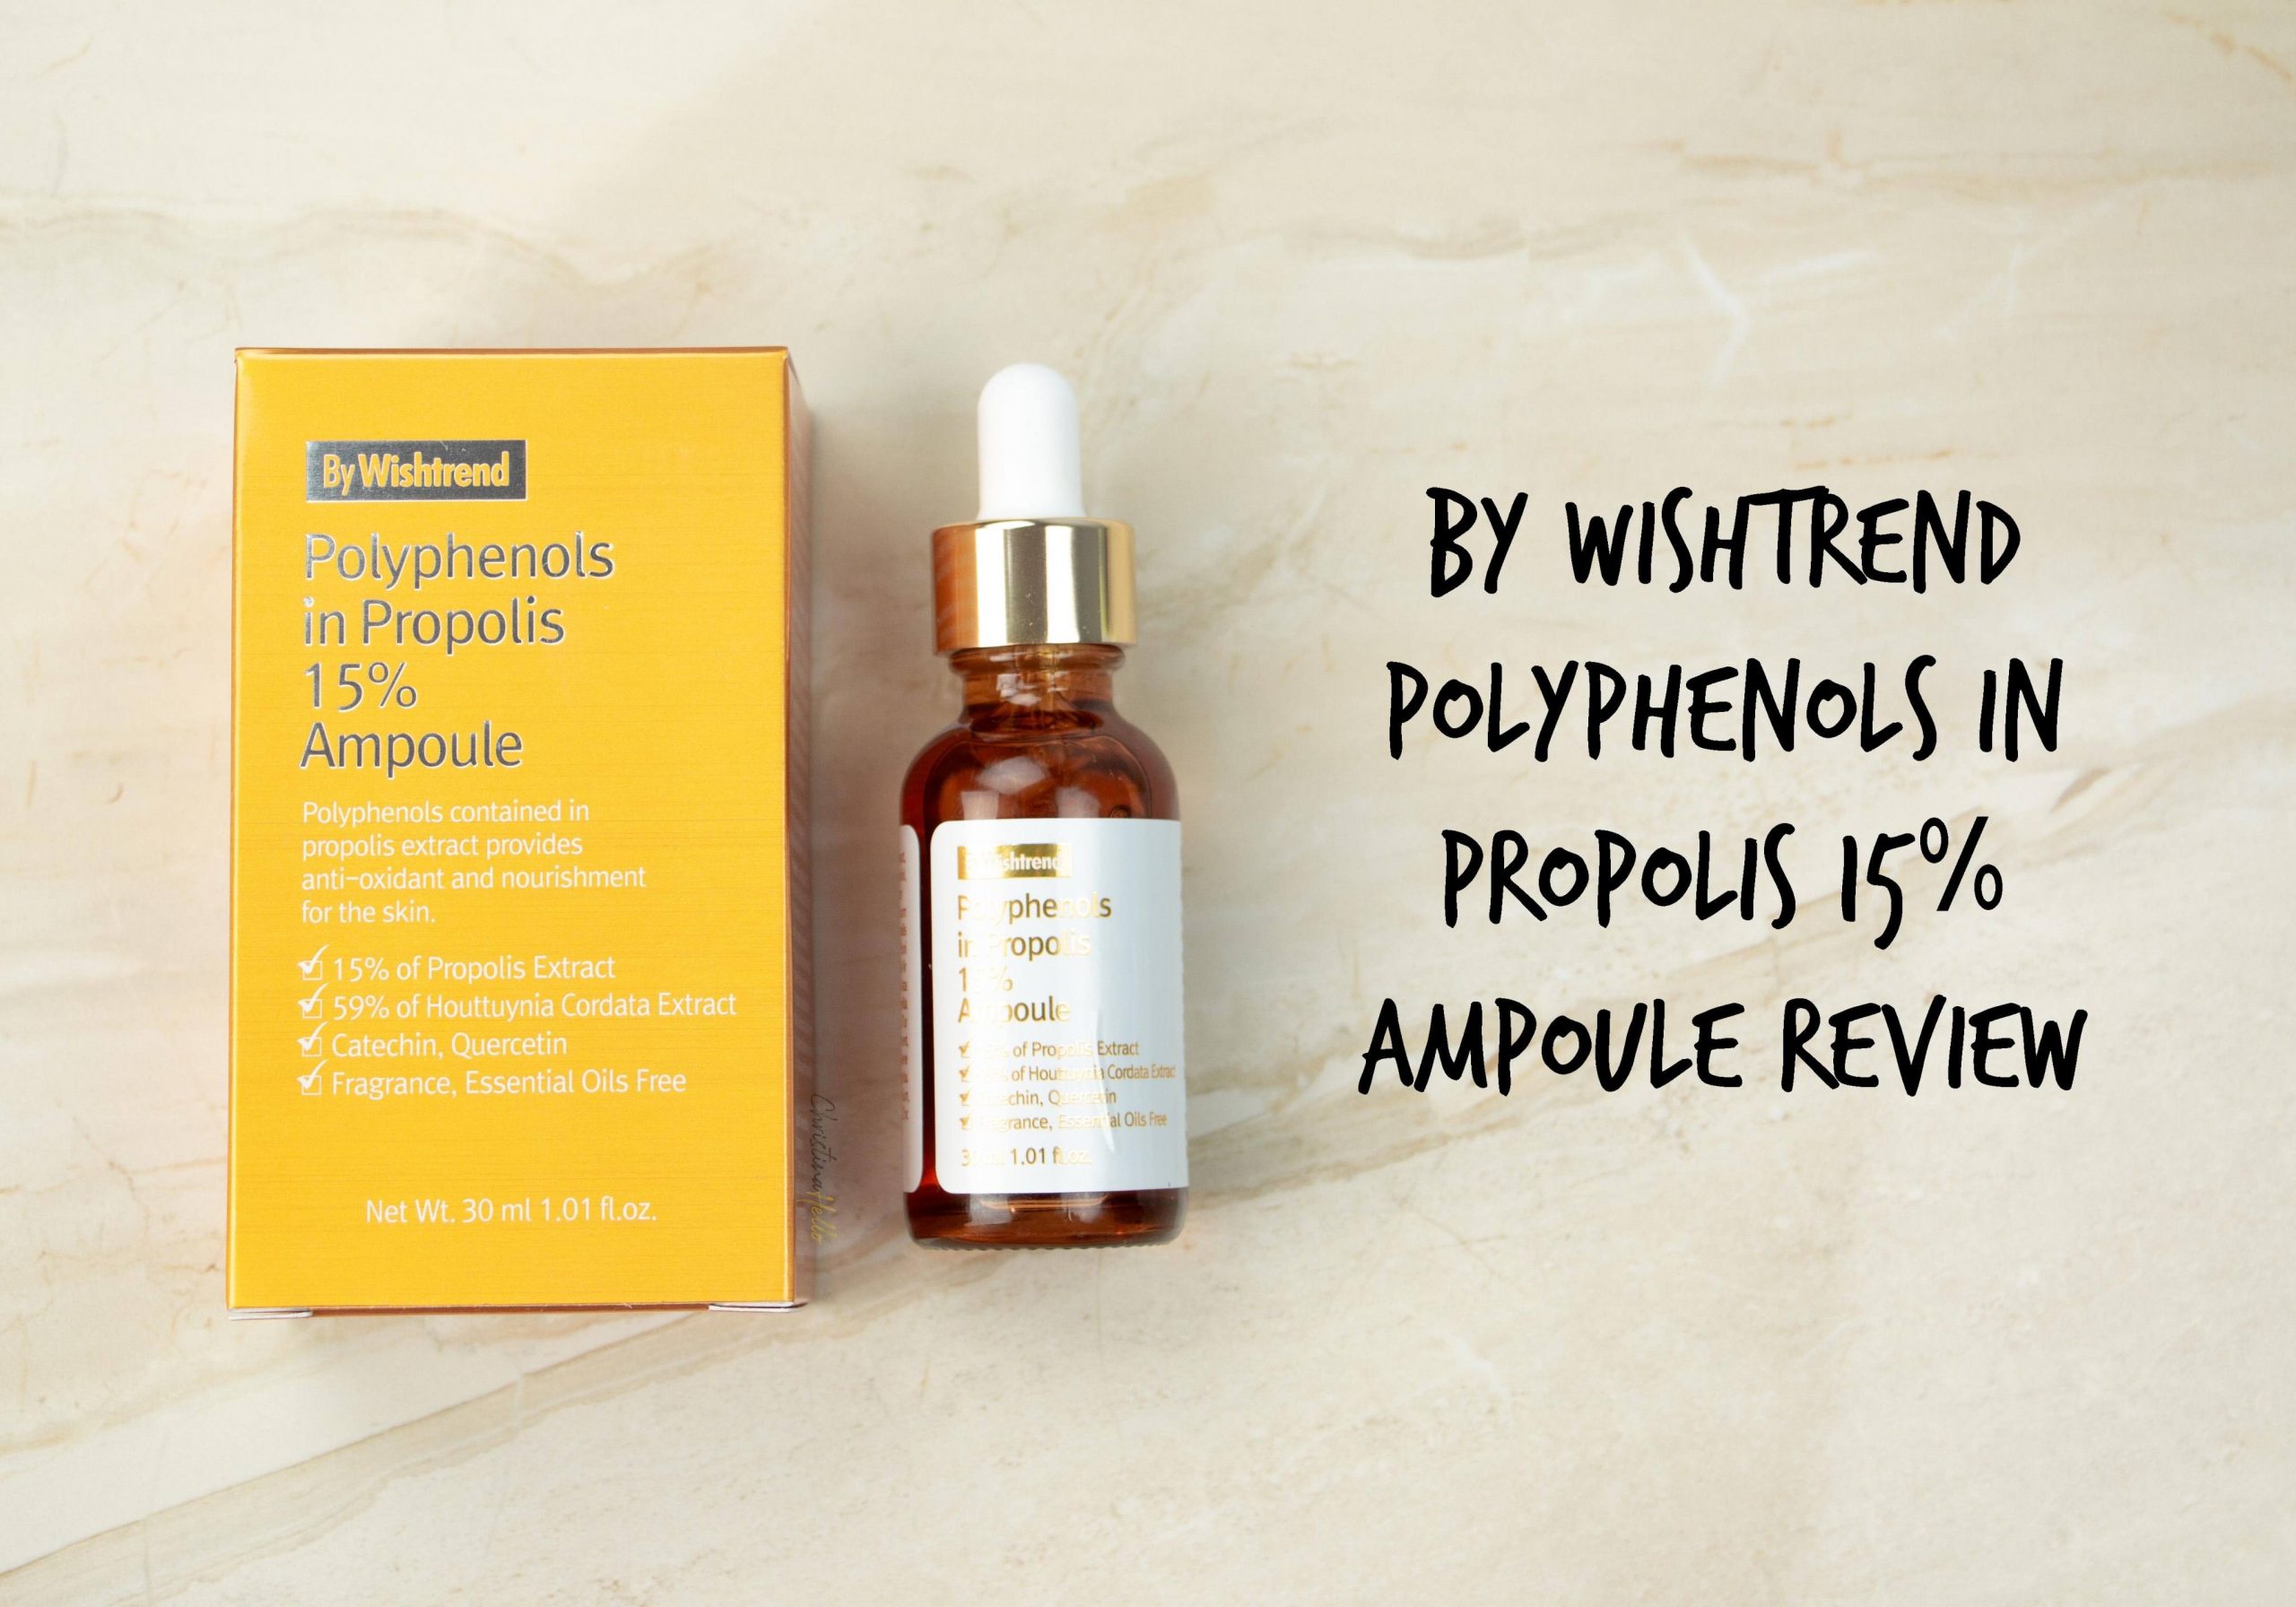 By wishtrend polyphenols in propolis 15% ampoule review